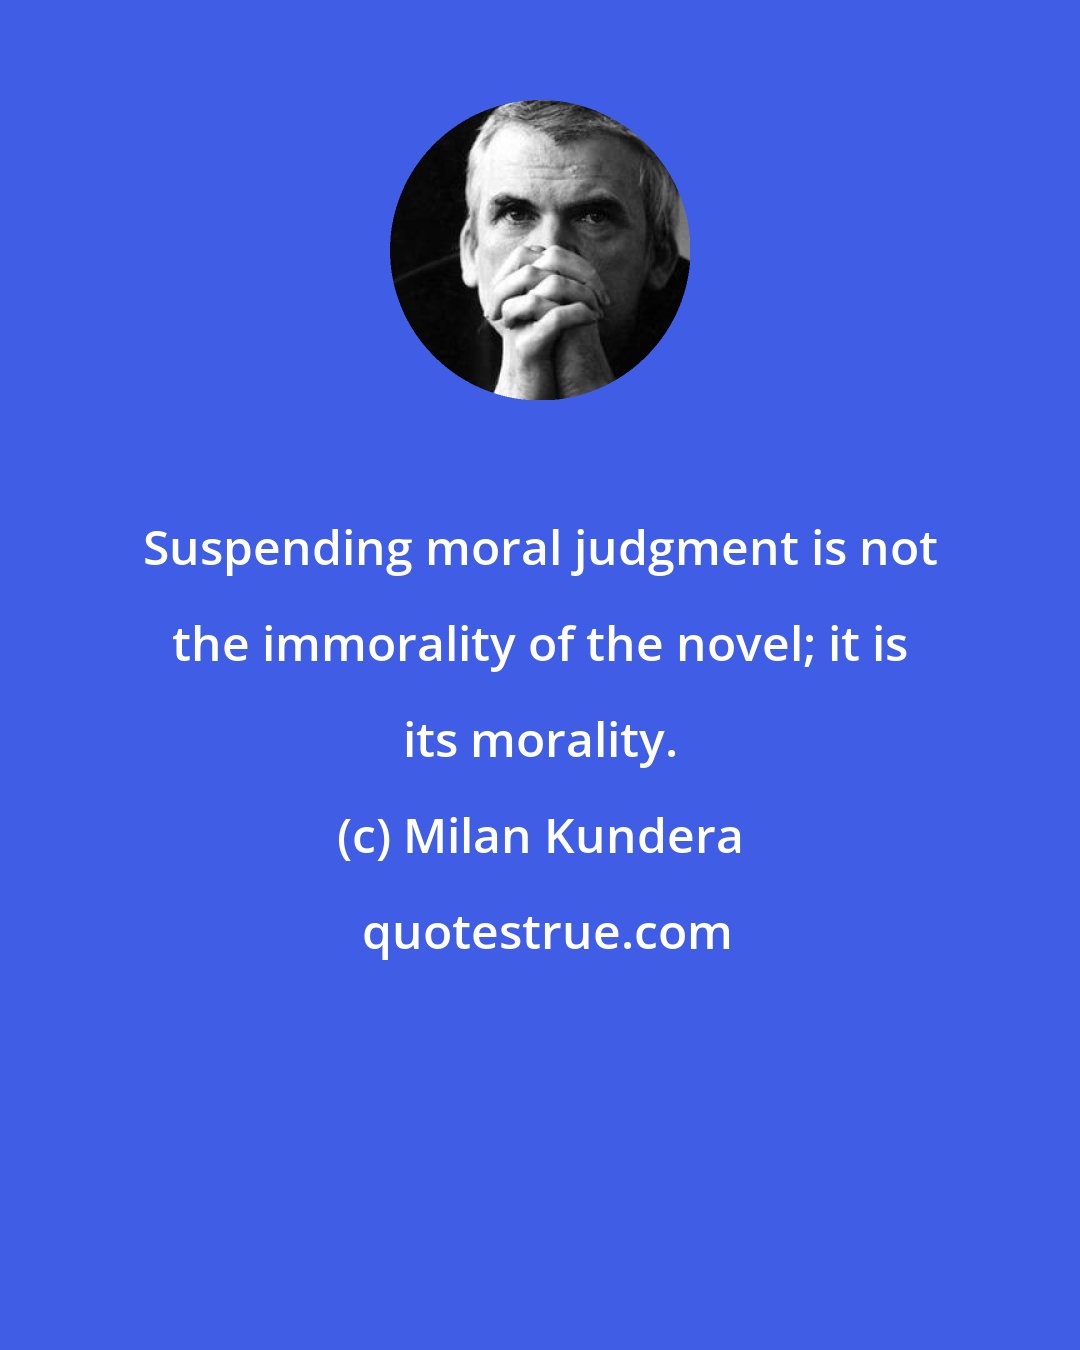 Milan Kundera: Suspending moral judgment is not the immorality of the novel; it is its morality.